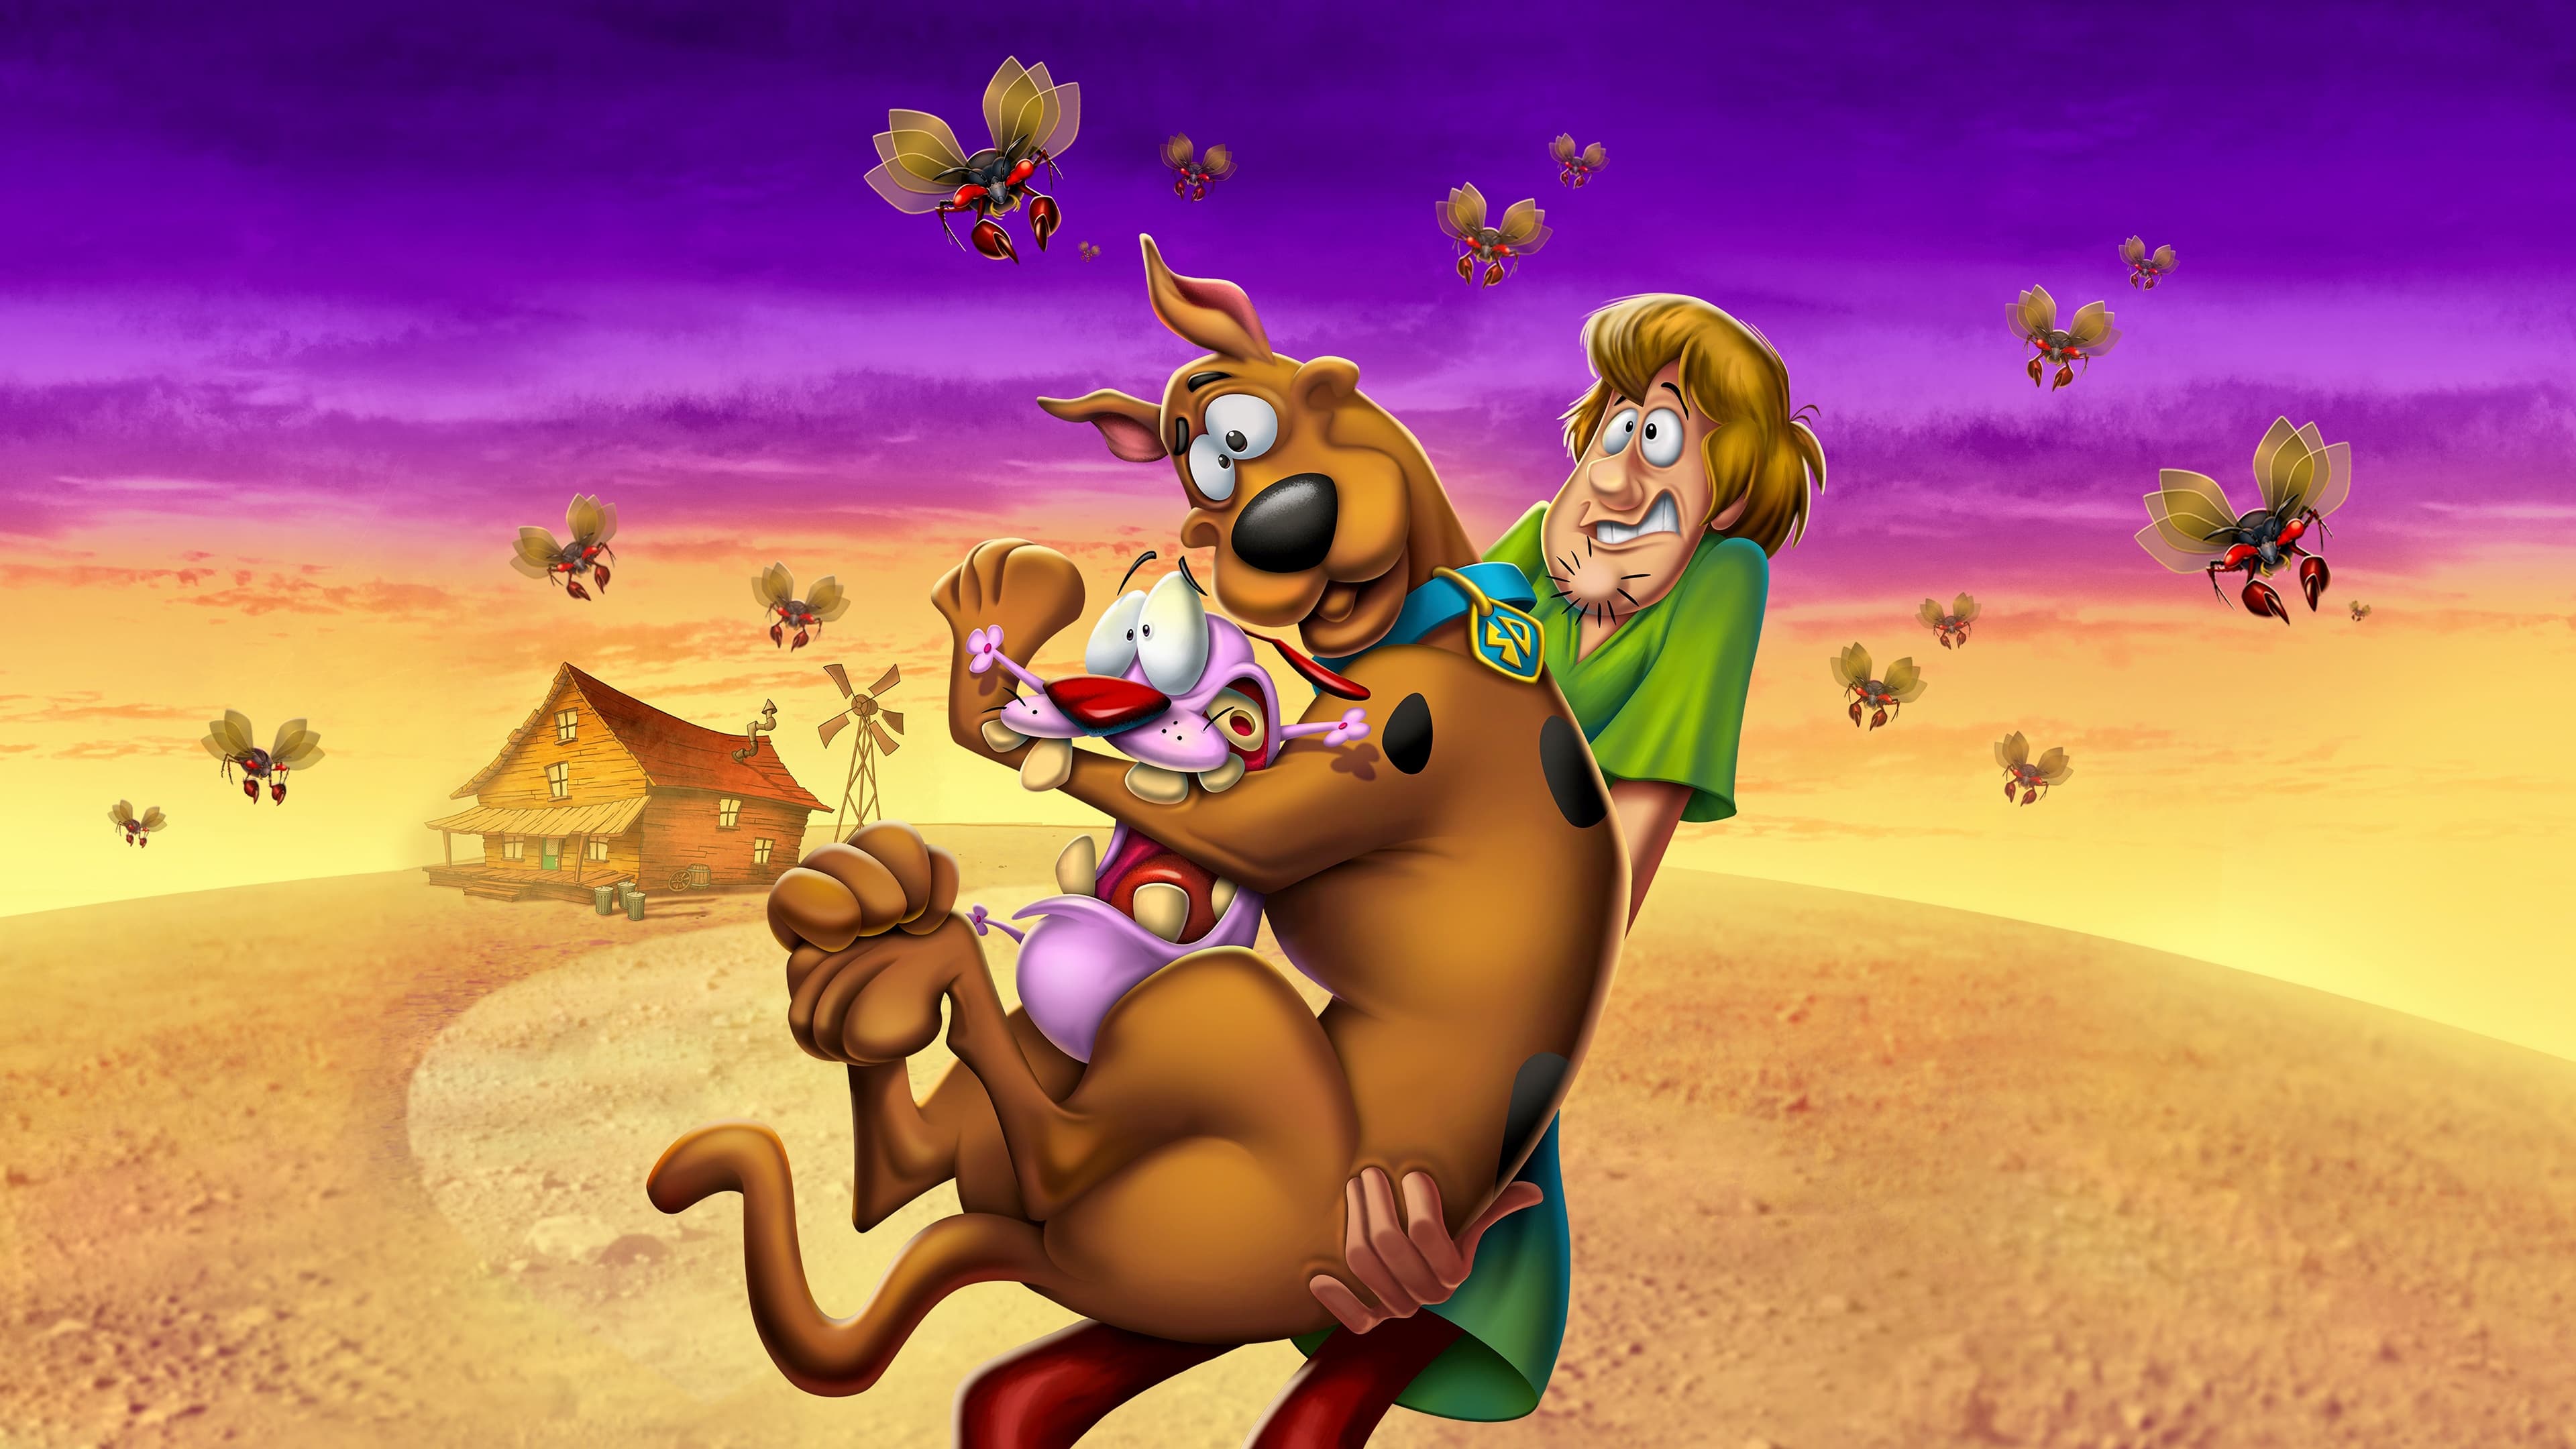 Straight Outta Nowhere: Scooby-Doo! Meets Courage the Cowardly Dog (2021) English Full Movie Watch Online